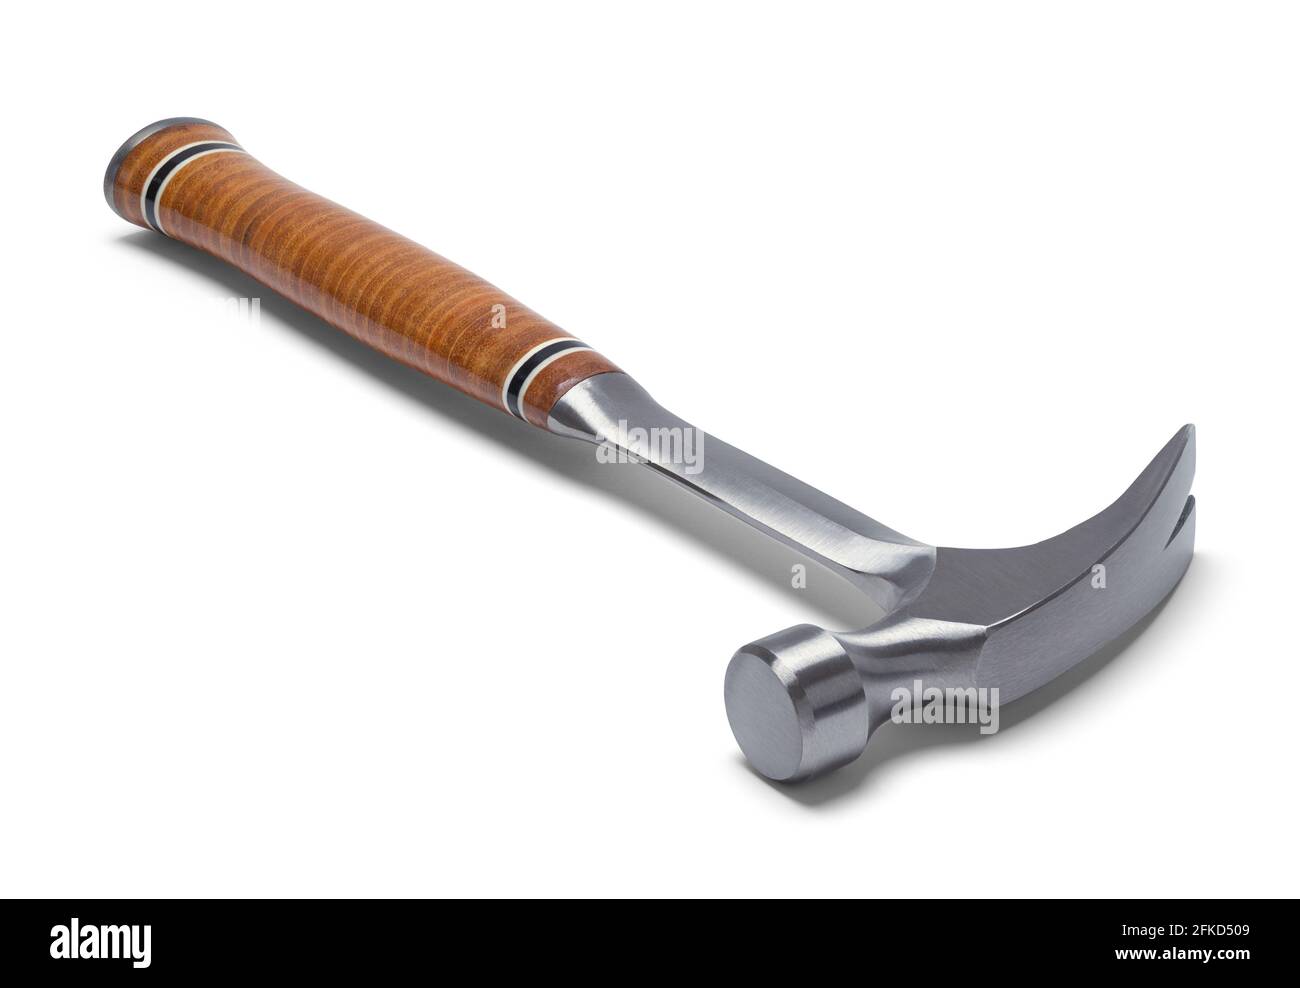 Metal Hammer With Leather Handle Grip Cut Out. Stock Photo